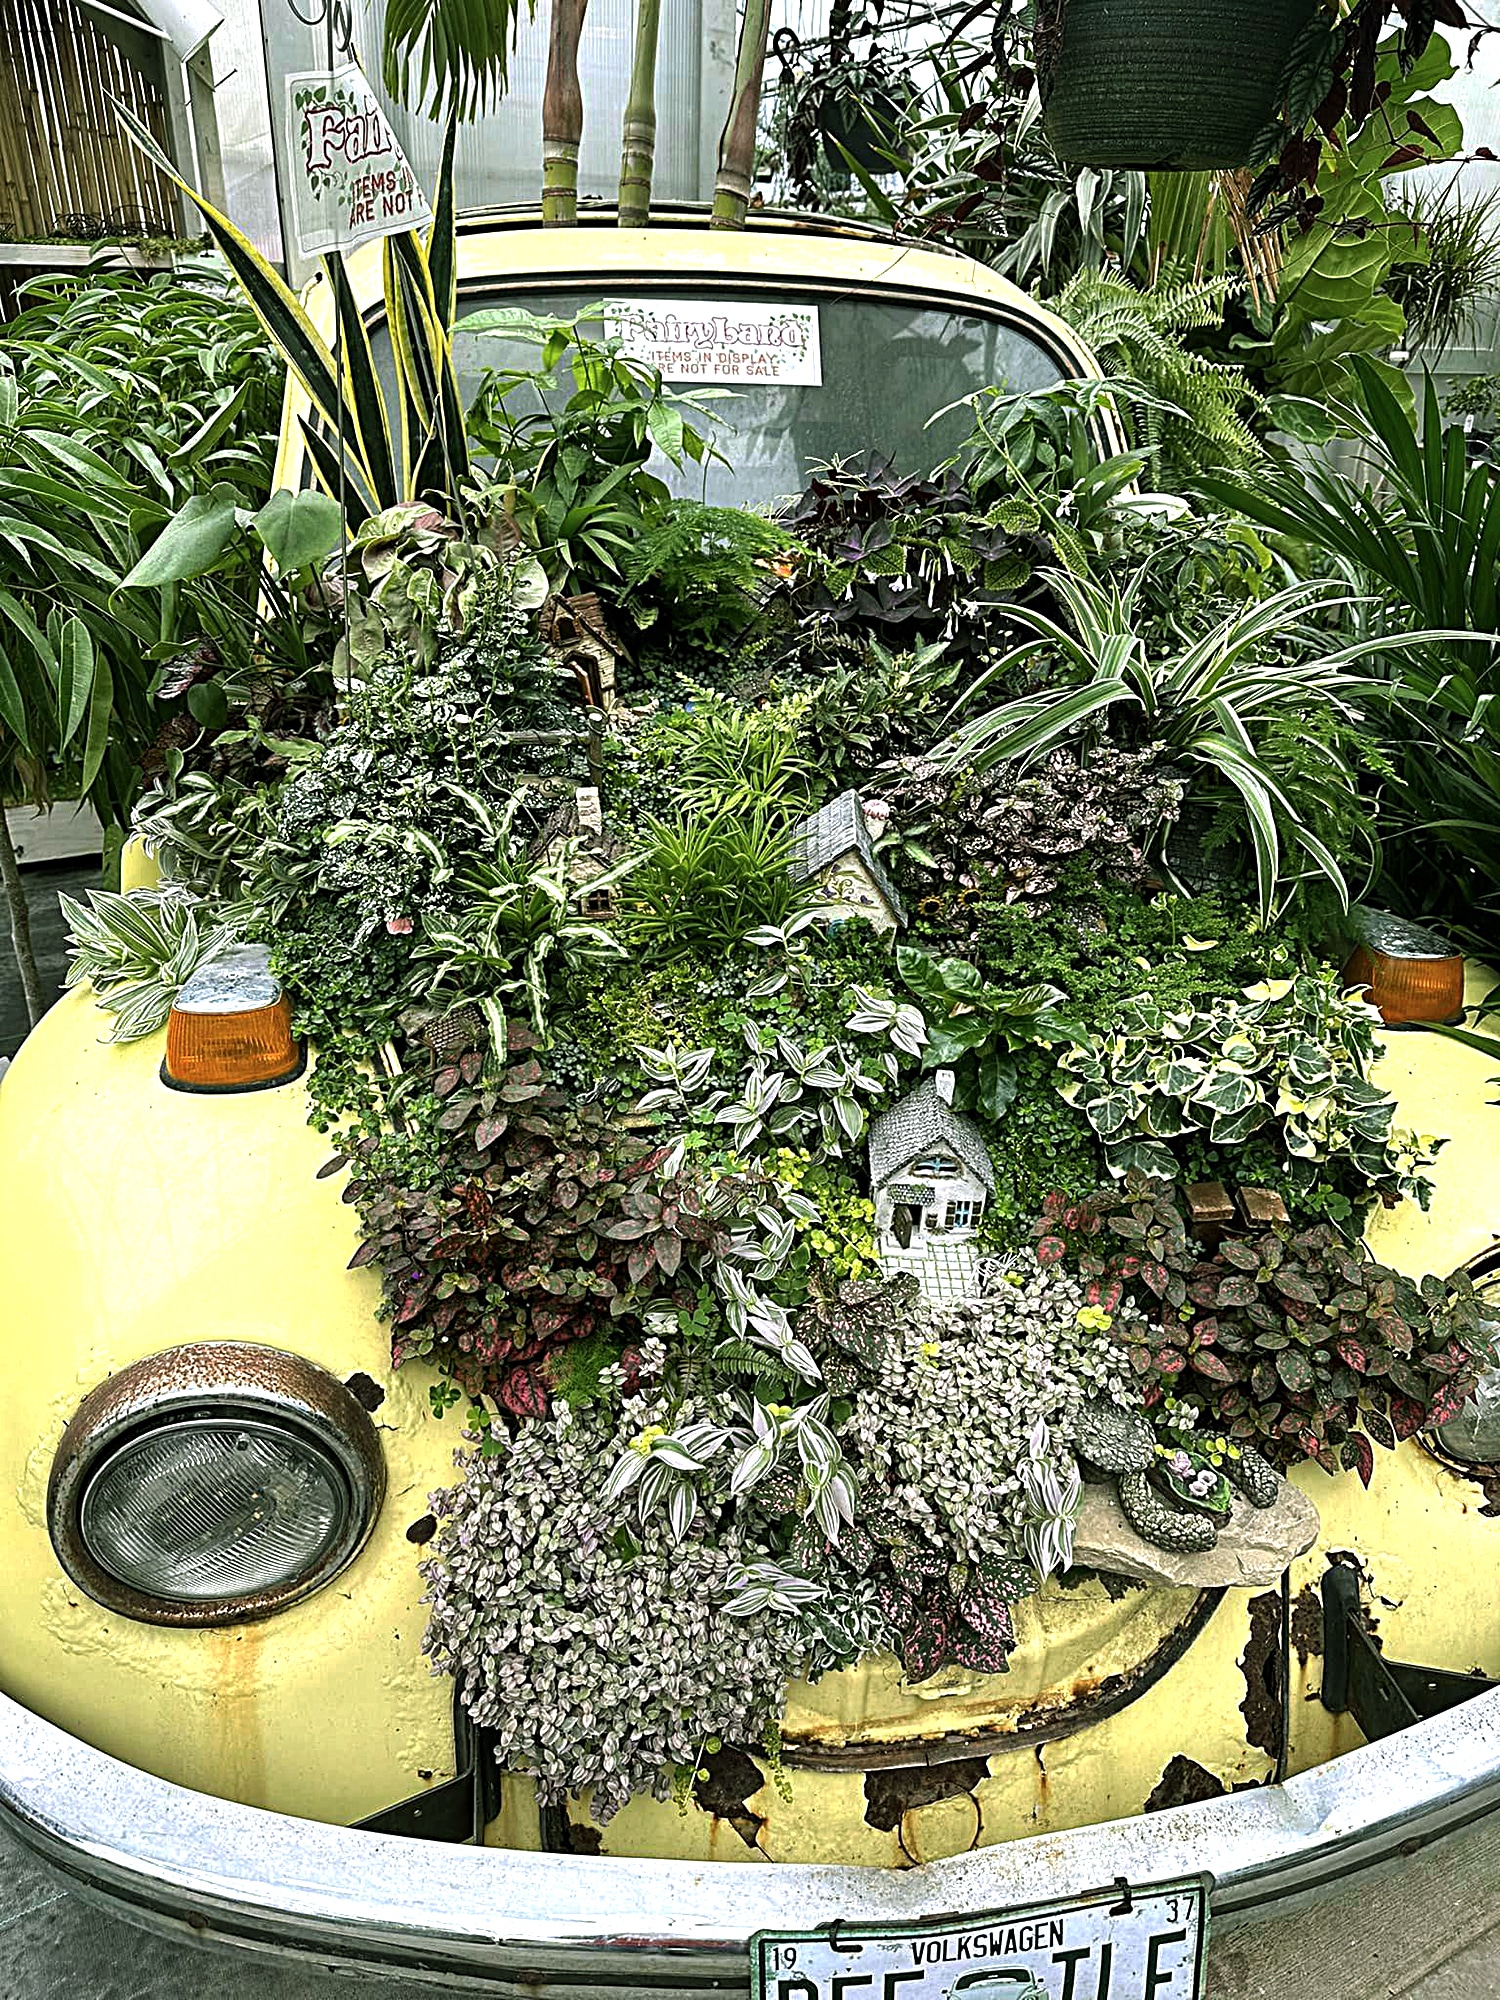 vertical image of a yellow beetle car with plants growing from the hood and trailing over the front at Groovy Plants Ranch. Image credit: CD, friend of VisitOhioToday.com